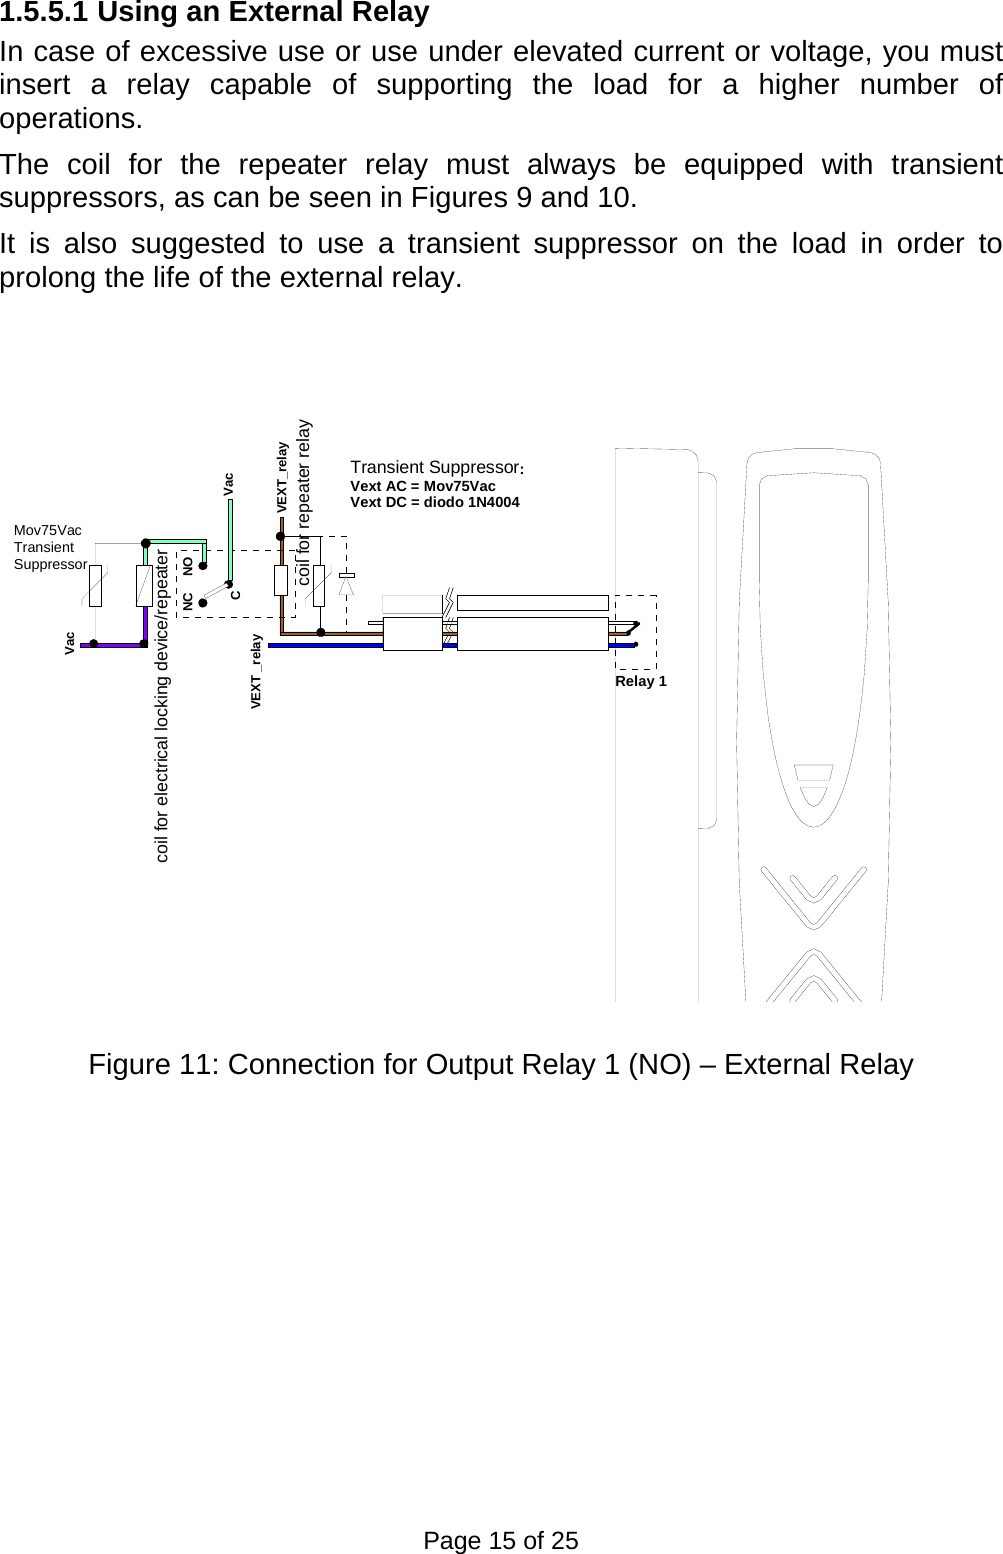 1.5.5.1  Using an External Relay In case of excessive use or use under elevated current or voltage, you must insert a relay capable of supporting the load for a higher number of operations. The coil for the repeater relay must always be equipped with transient suppressors, as can be seen in Figures 9 and 10. It is also suggested to use a transient suppressor on the load in order to prolong the life of the external relay.  VEXT_relayVEXT _relaycoil for repeater relayTransient Suppressor:Vext AC = Mov75Vac Vext DC = diodo 1N4004Relay 1Mov75Vac Transient SuppressorVacVacCNC NOcoil for electrical locking device/repeater  Figure 11: Connection for Output Relay 1 (NO) – External Relay   Page 15 of 25 